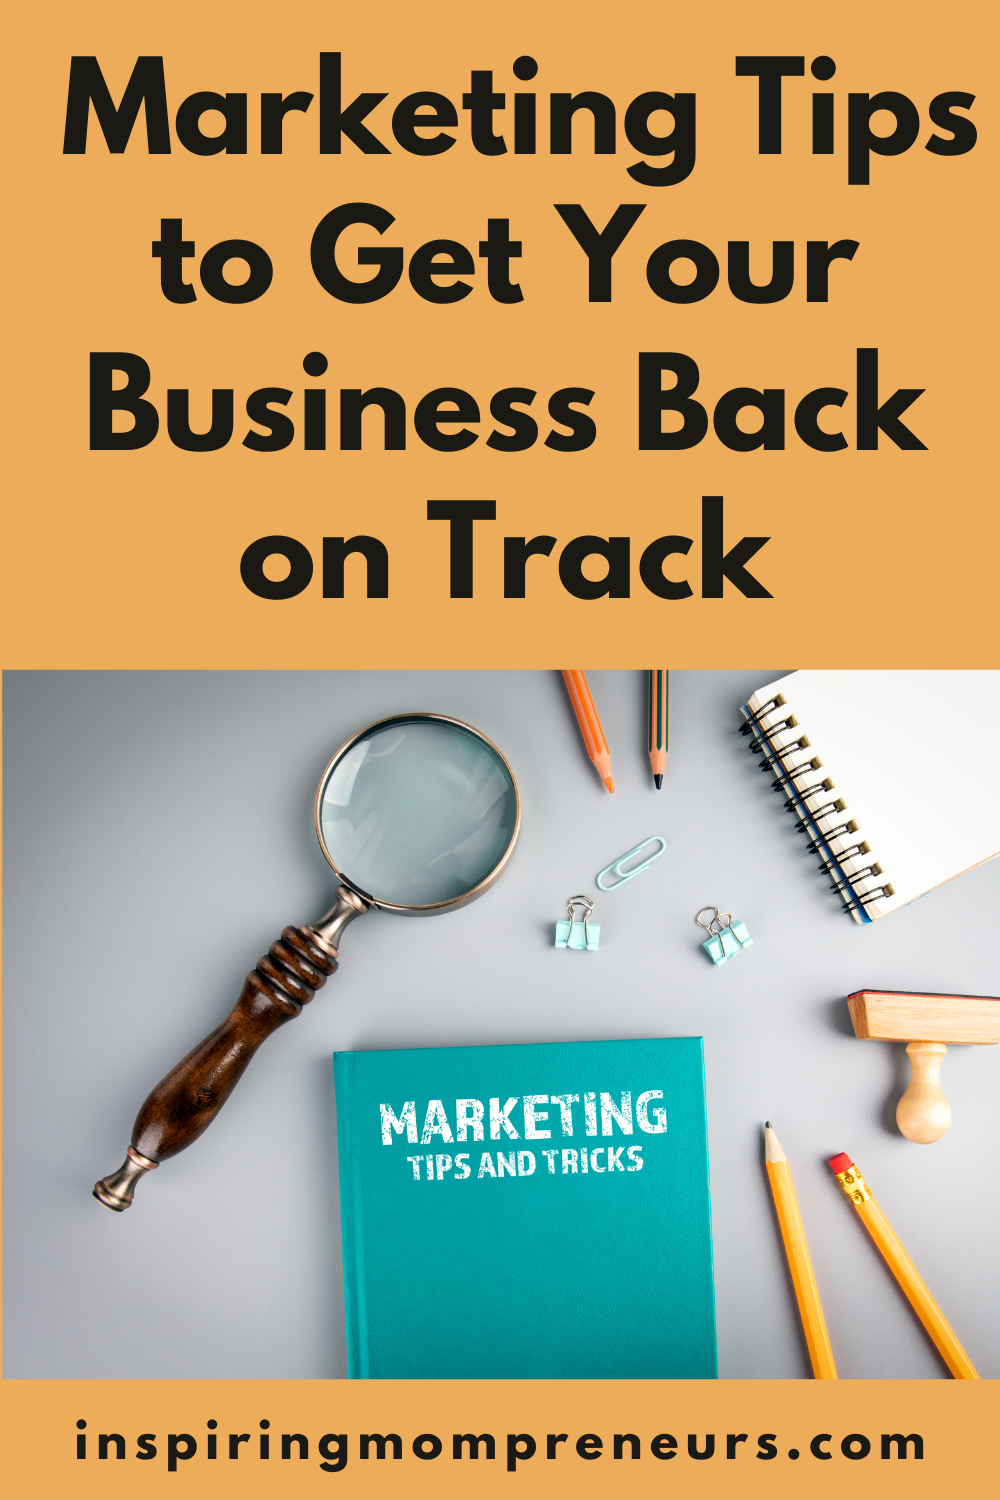 The past couple of years have been tough on business. That's why we've put together a list of marketing tips to help you to get your company back on track.